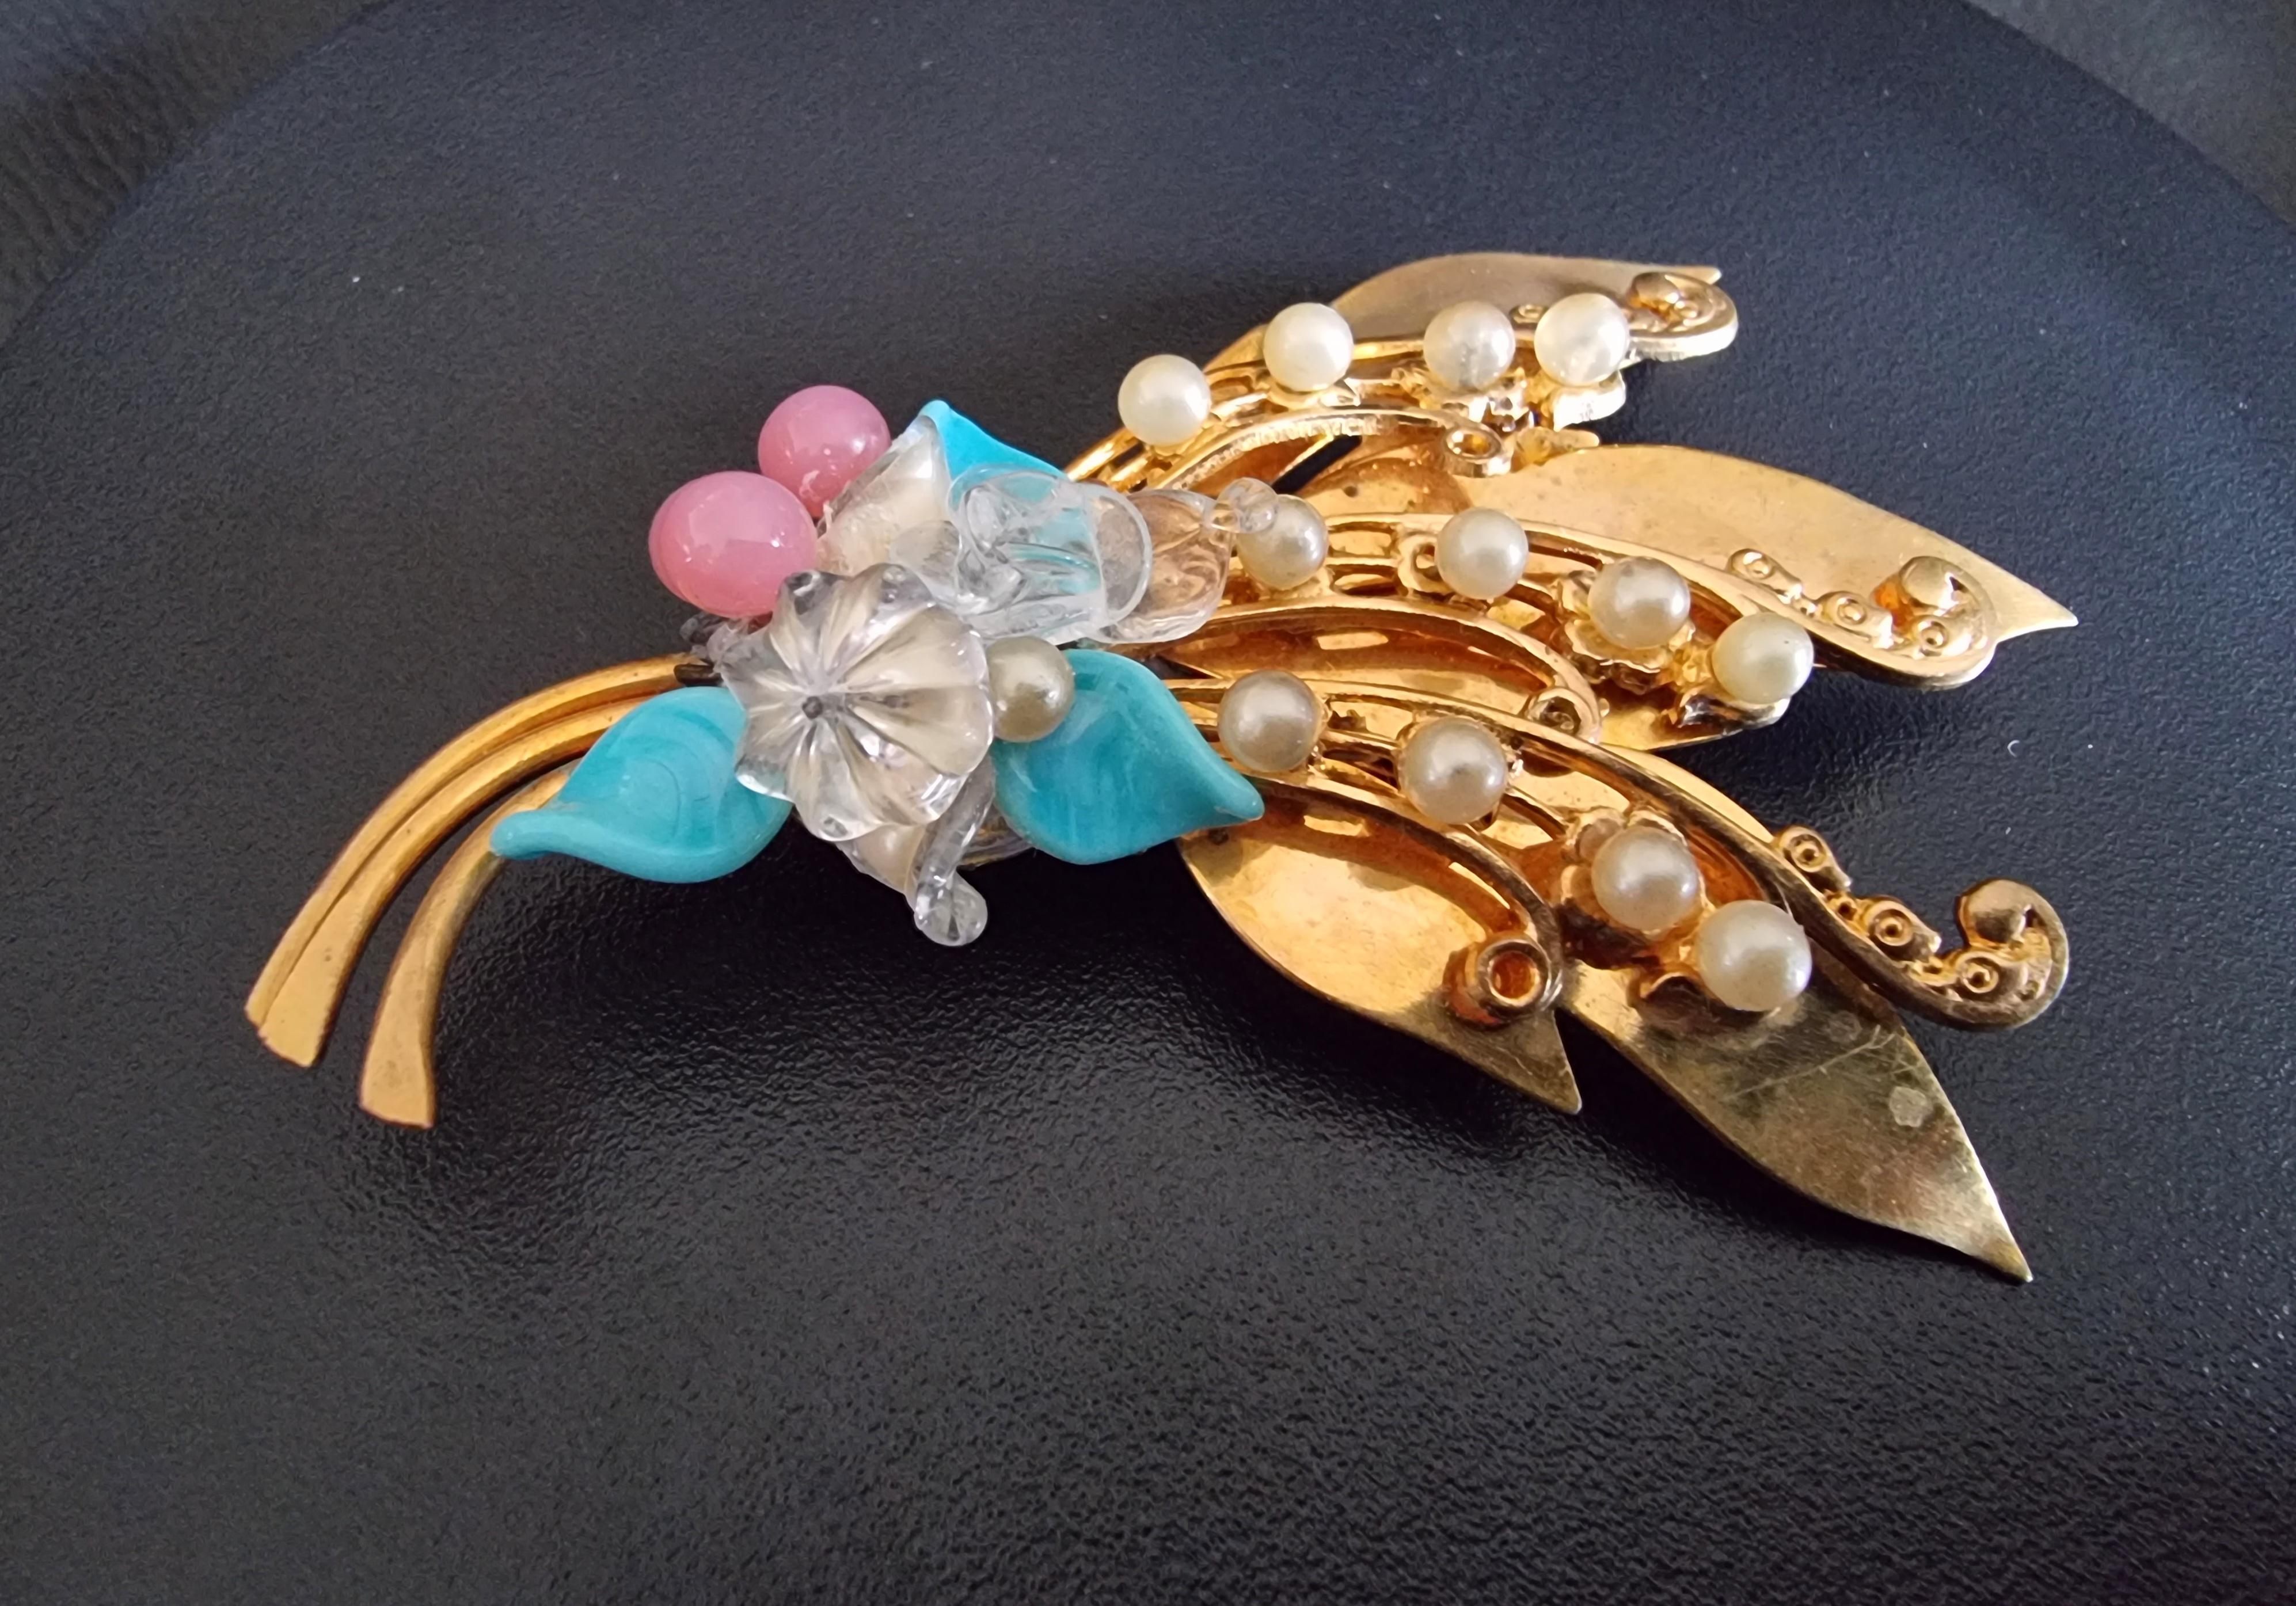 Sublime old BROOCH,
40s vintage,
by famous French designer LOUIS ROUSSELET and Gripoix glass,
length 8cm, width 5.5cm,
good condition.


A child of Ménilmontant and the popular suburbs of Paris, Louis Rousselet was born in 1892 and shared his first